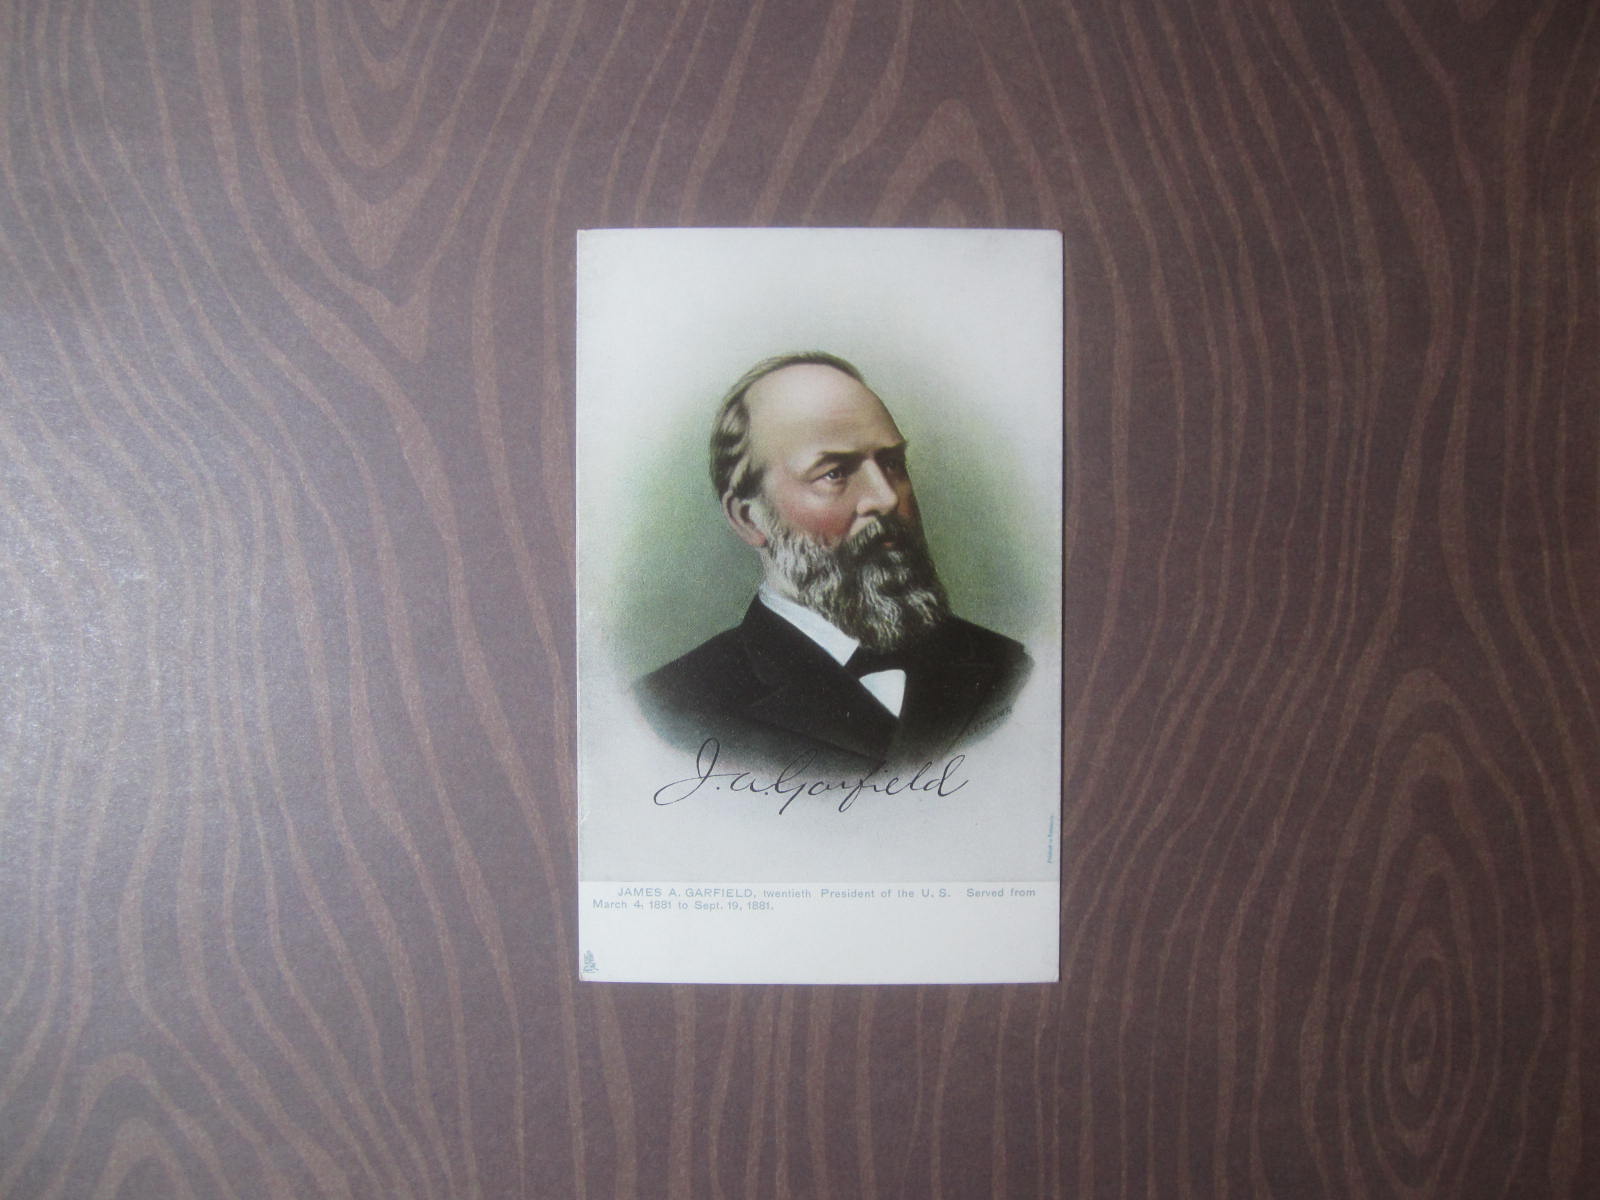 James Garfield Postcard - Raphael Tuck & Sons' Post Card Serises No. 2328 "Presidents of the United States"